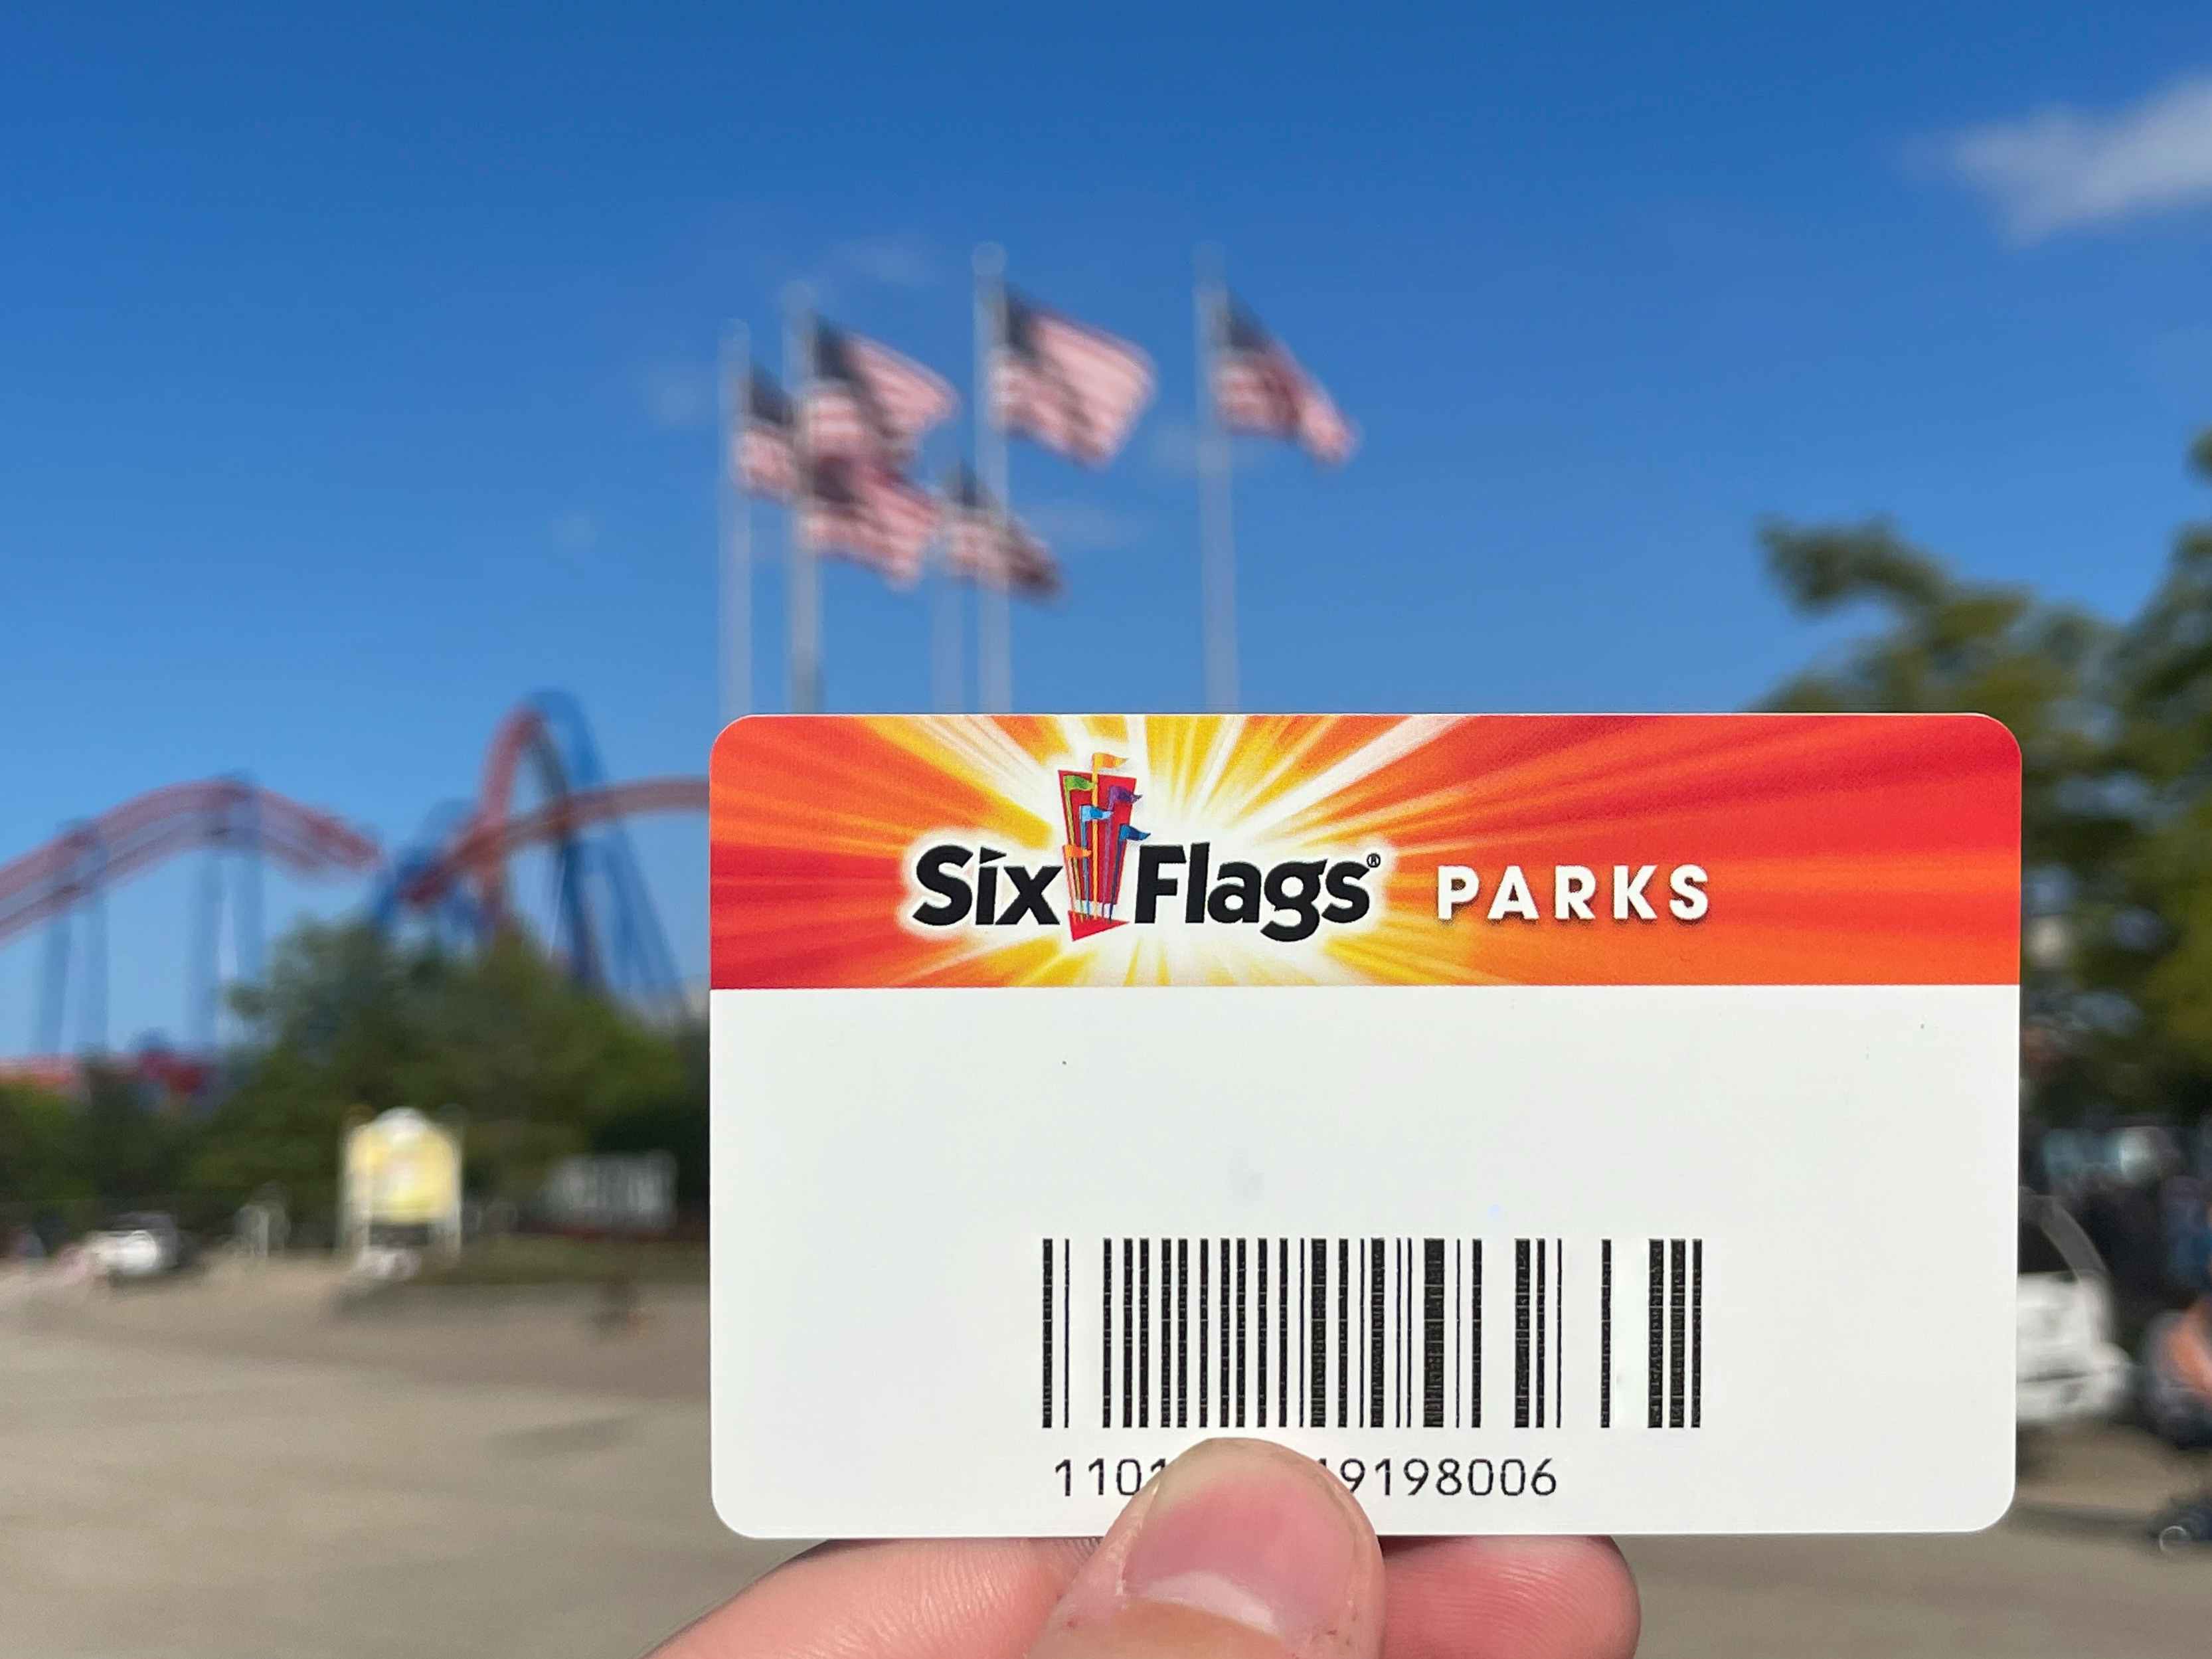 Is six flags amusement park season pass held in front of the park. American flags can be seen on flag poles in the background.